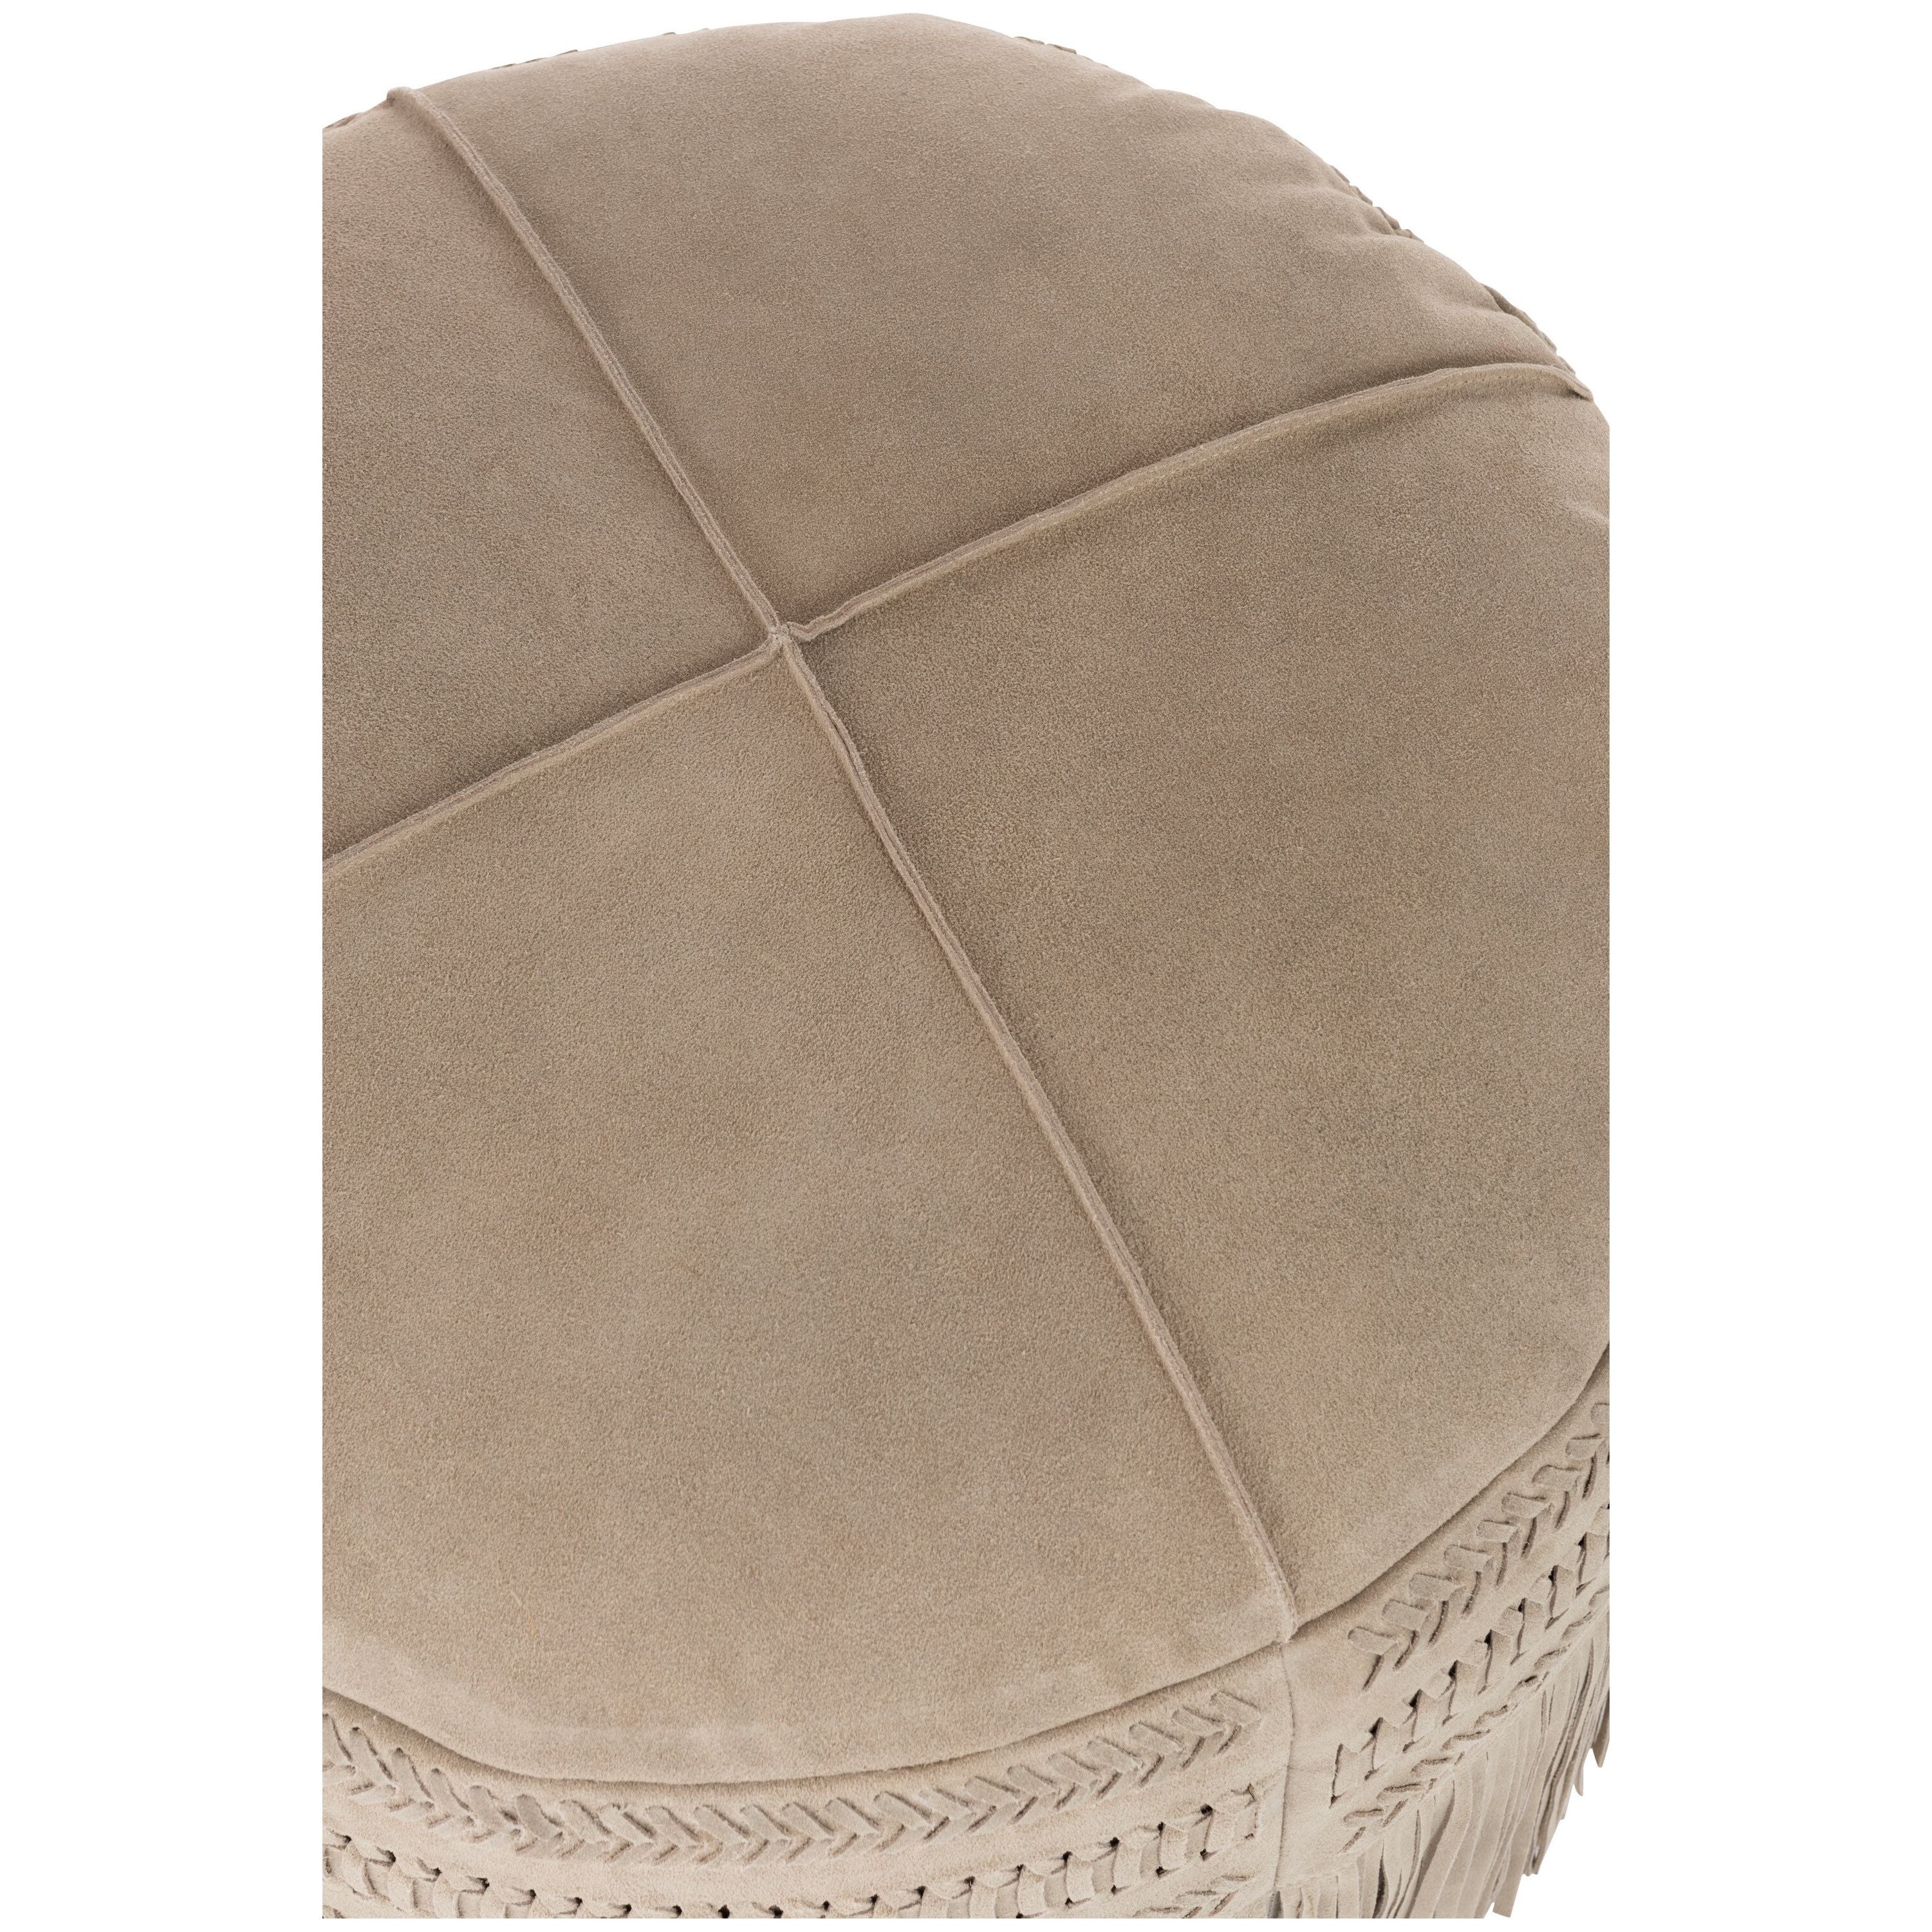 Pouf Fringes Round Leather Light Gray